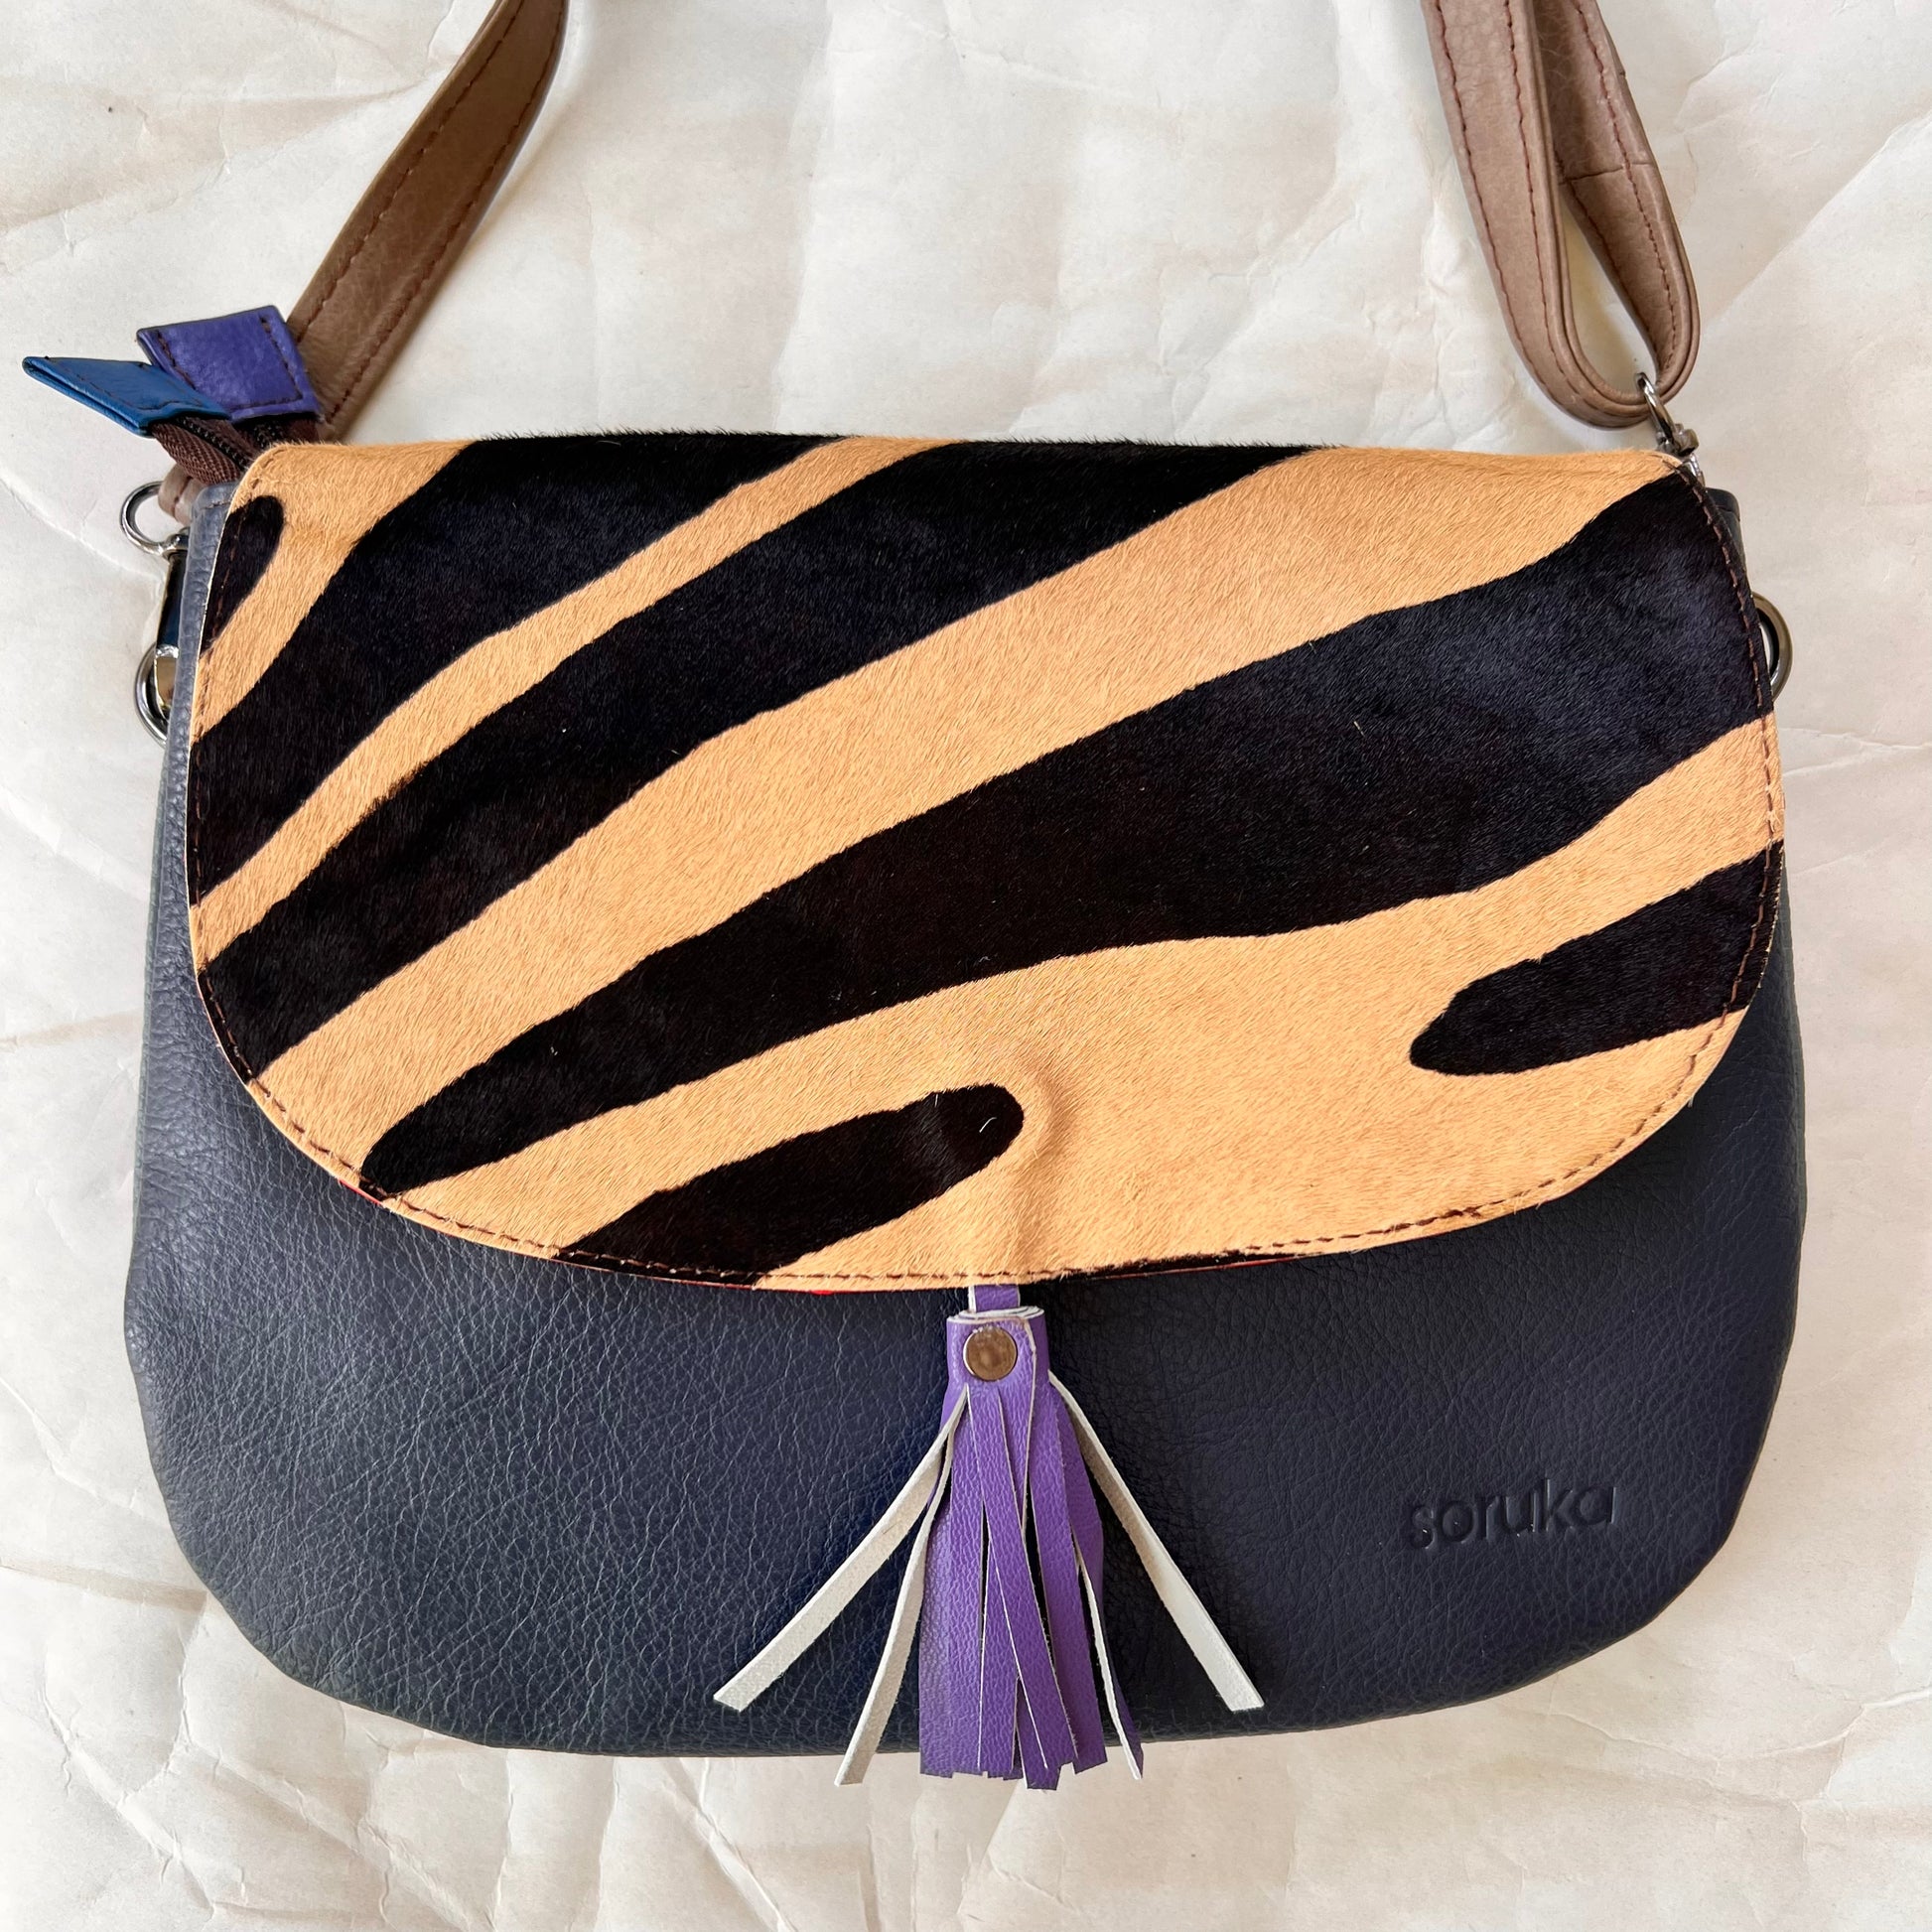 lola bag with animal print hair-on-hide flap with purple tassel over a navy body.